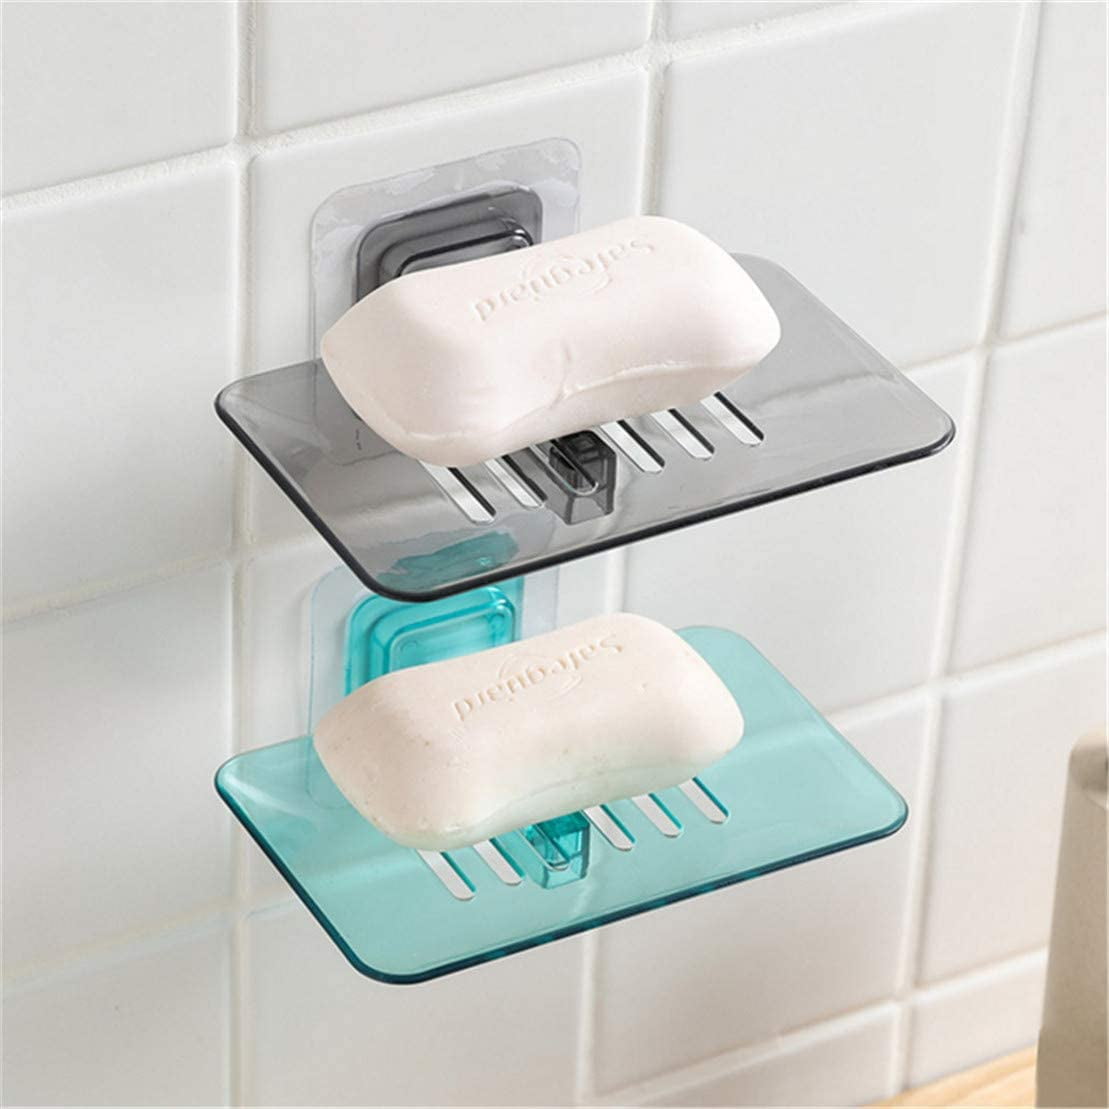 Suction Soap Holder Dish Cup Bathroom Wall Shower Drain 2 Layers Self Adhesive